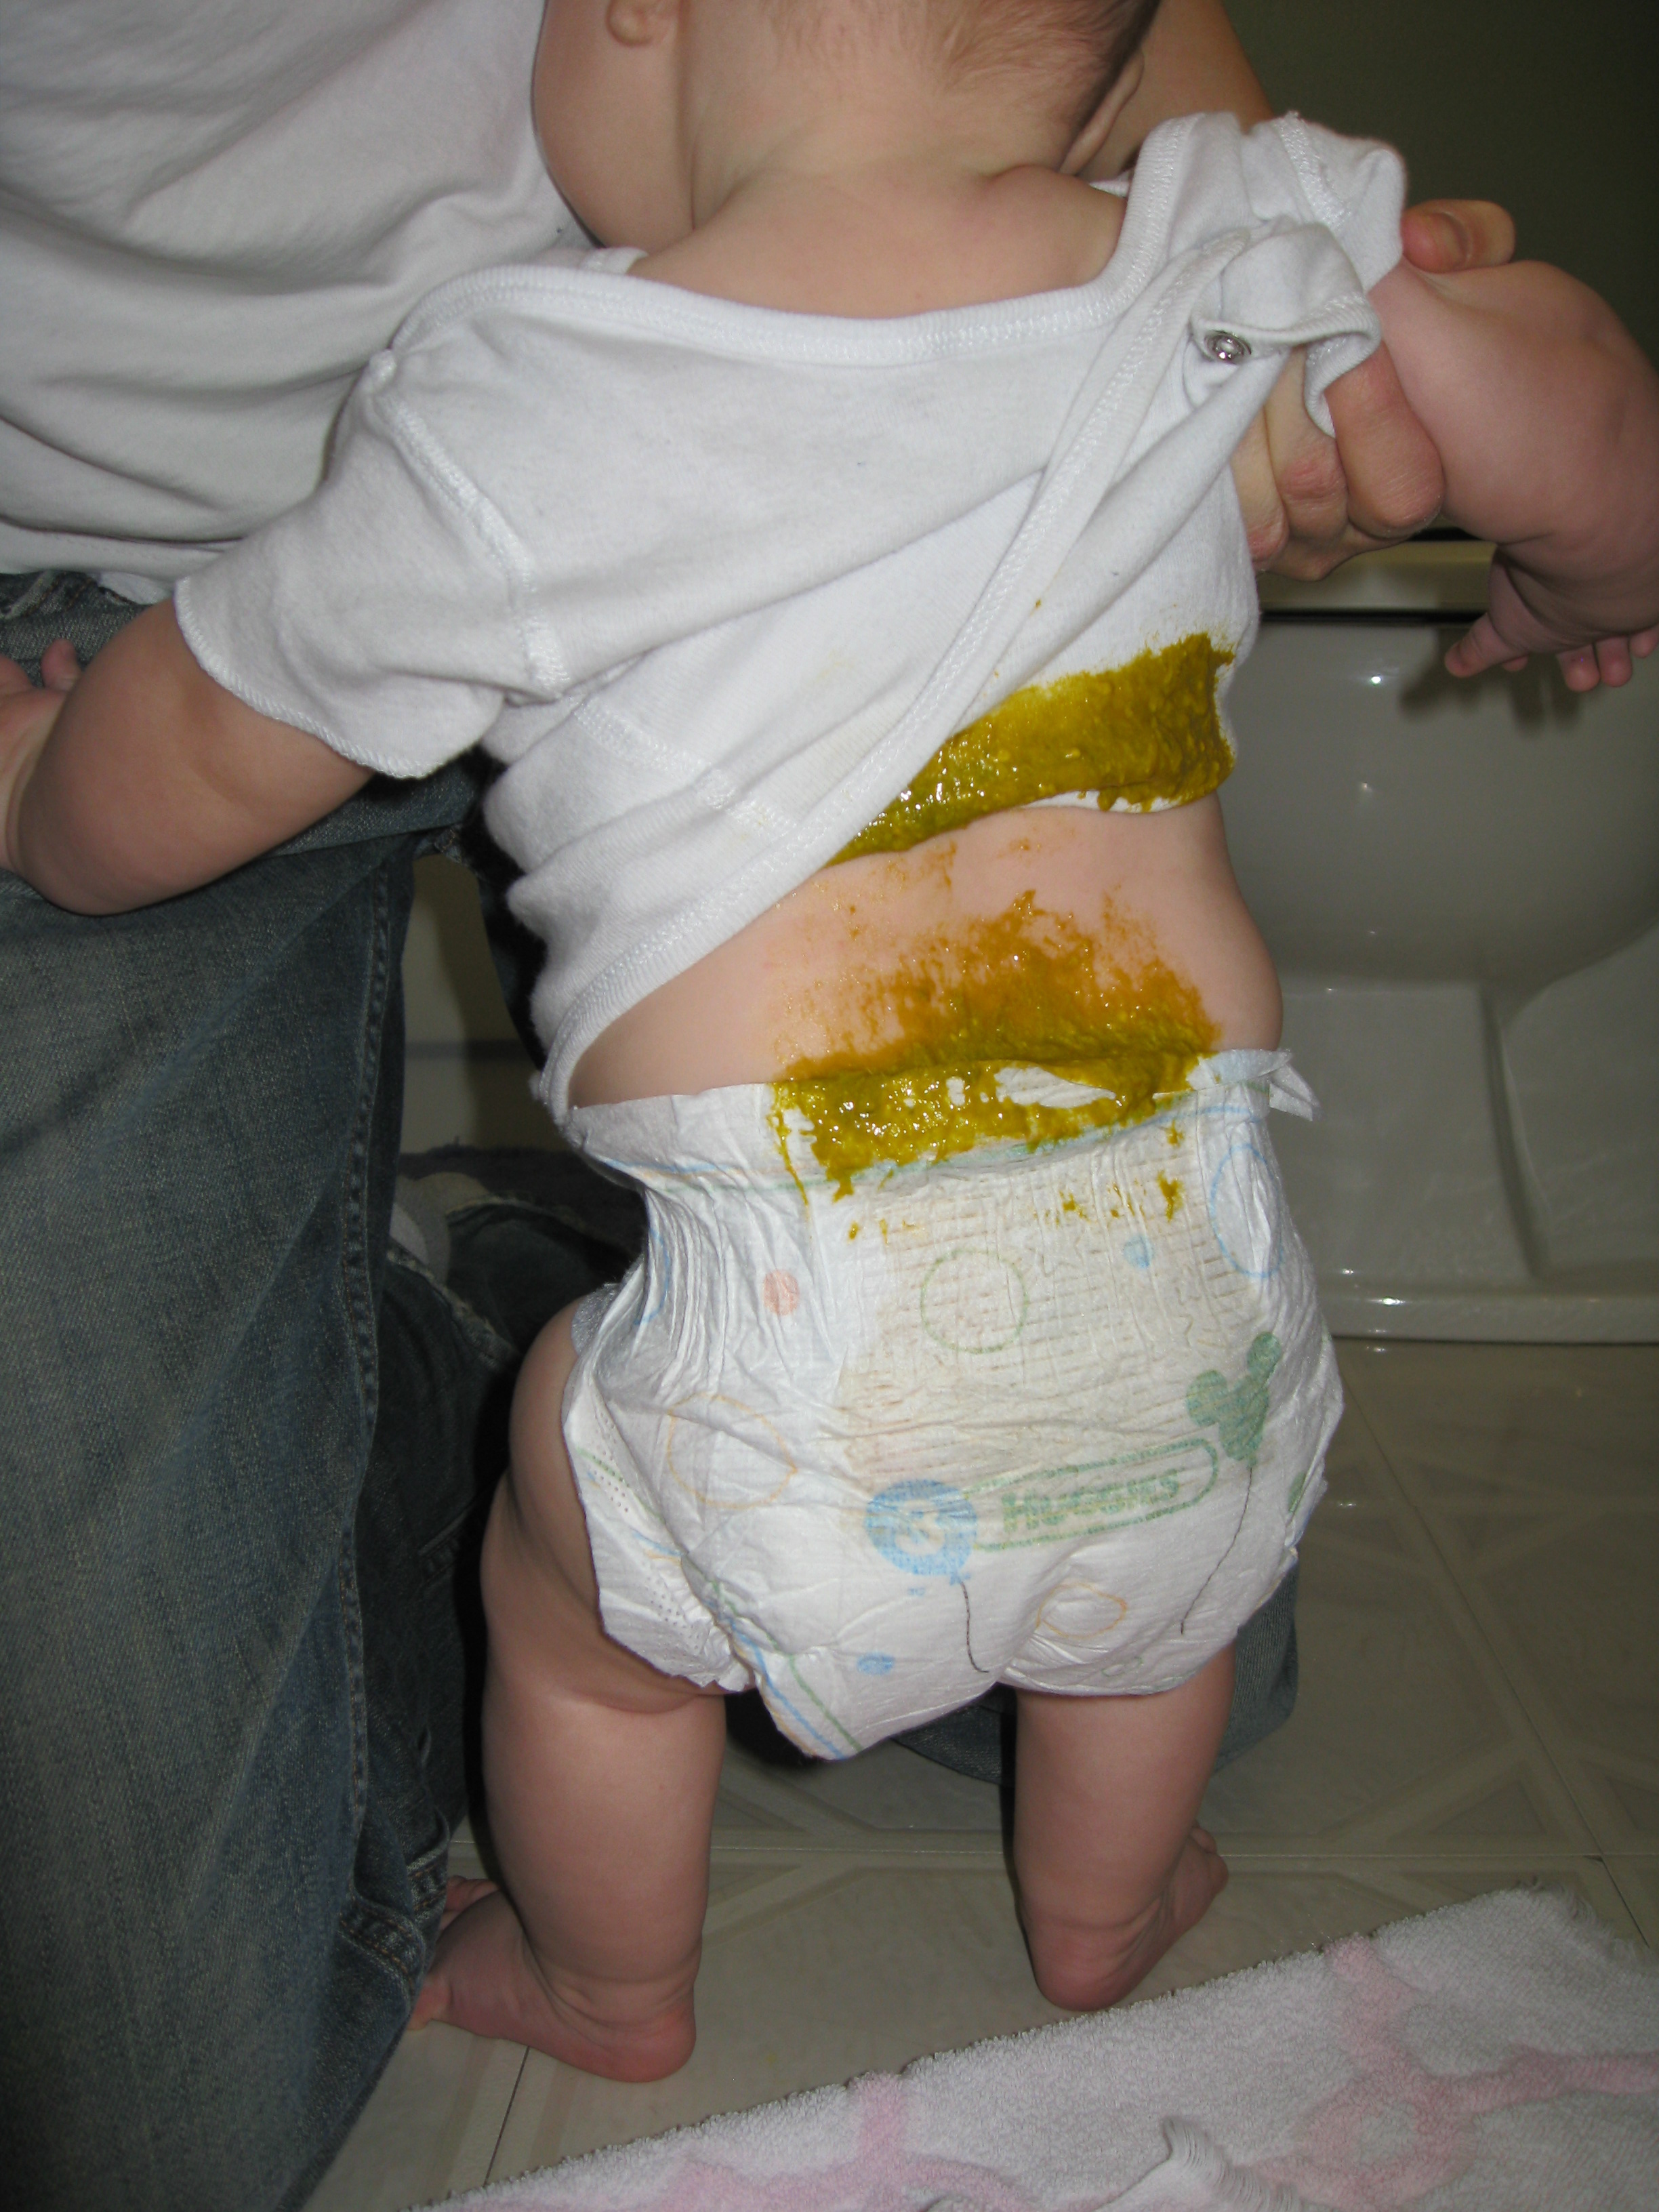 Too many diapers like this (pic)-DH's ex angry - Page 6 ...